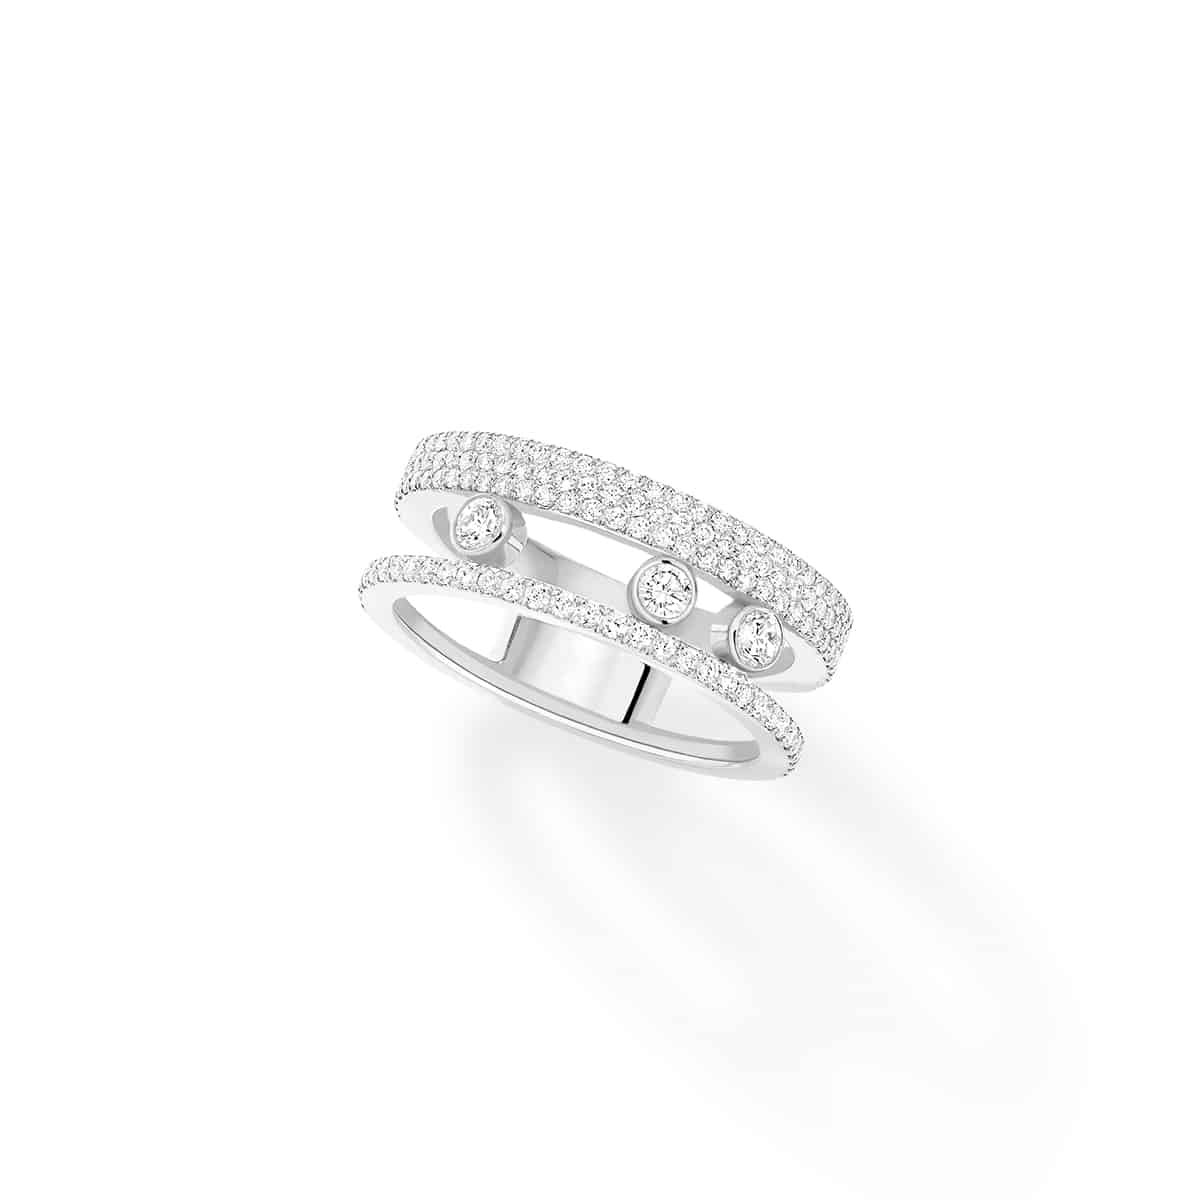 Move Roman ring by Messika